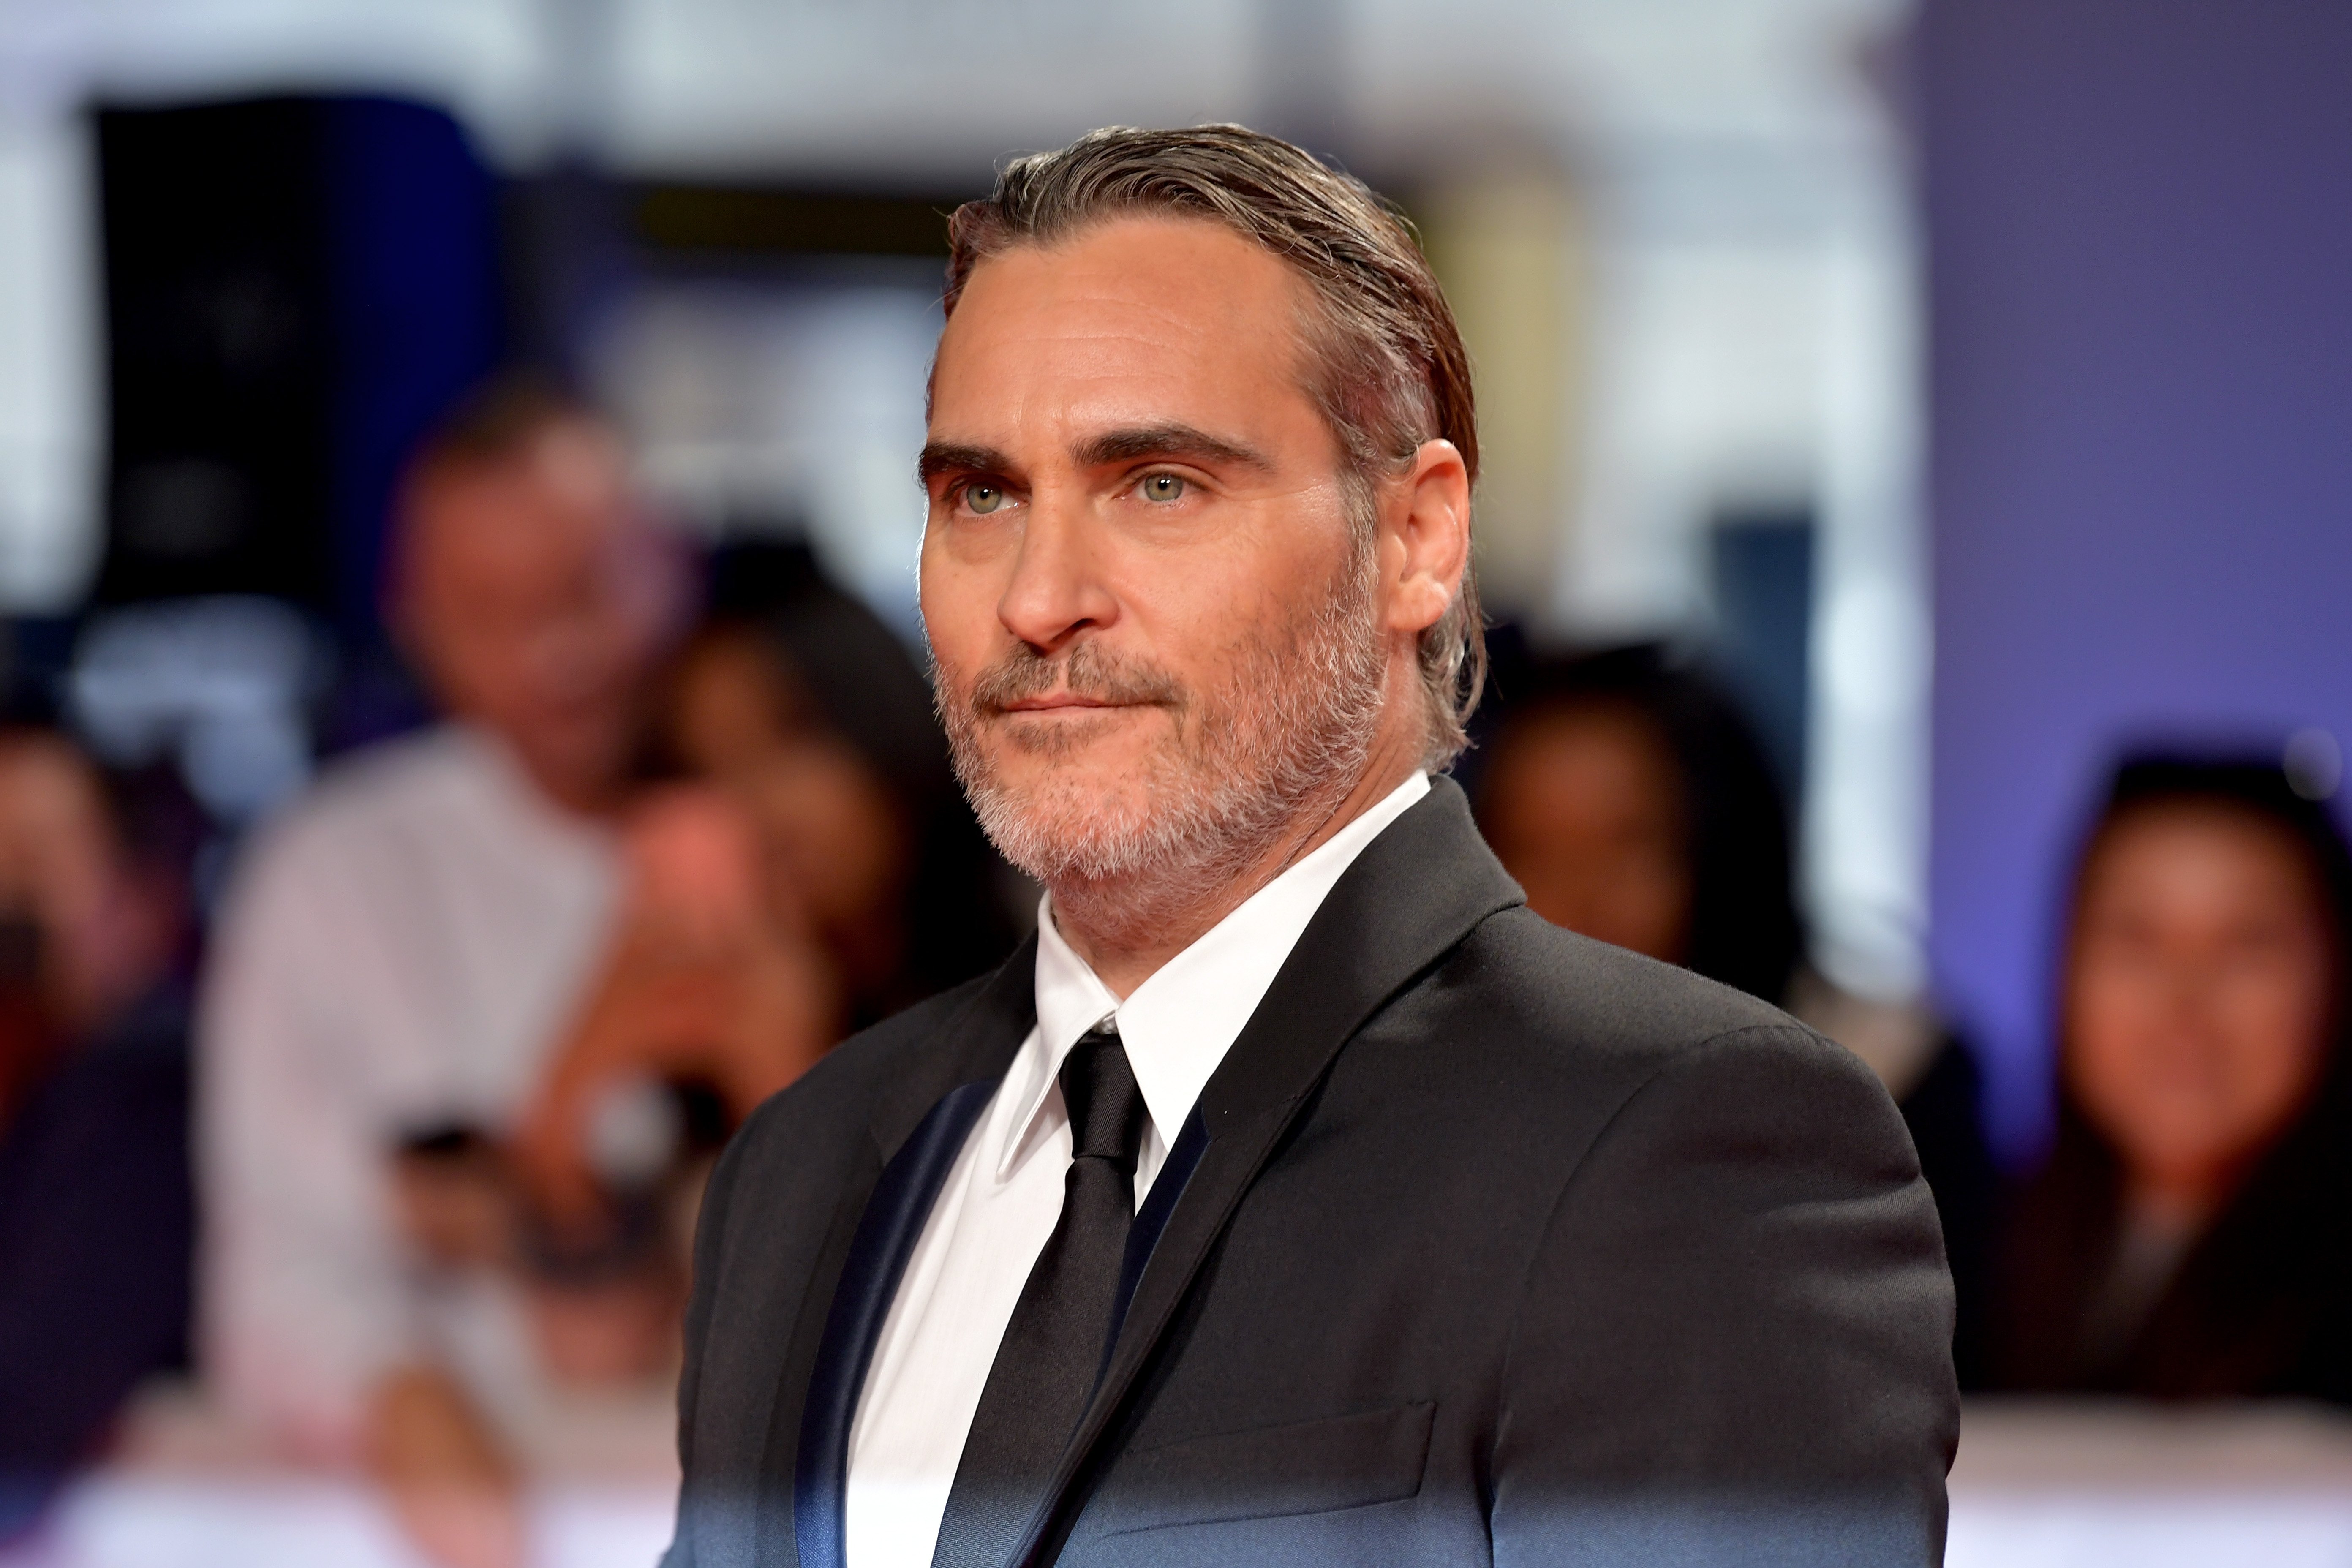 Joaquin Phoenix attends the "Joker" premiere during the 2019 Toronto International Film Festival at Roy Thomson Hall on September 09, 2019, in Toronto, Canada. | Source: Getty Images.